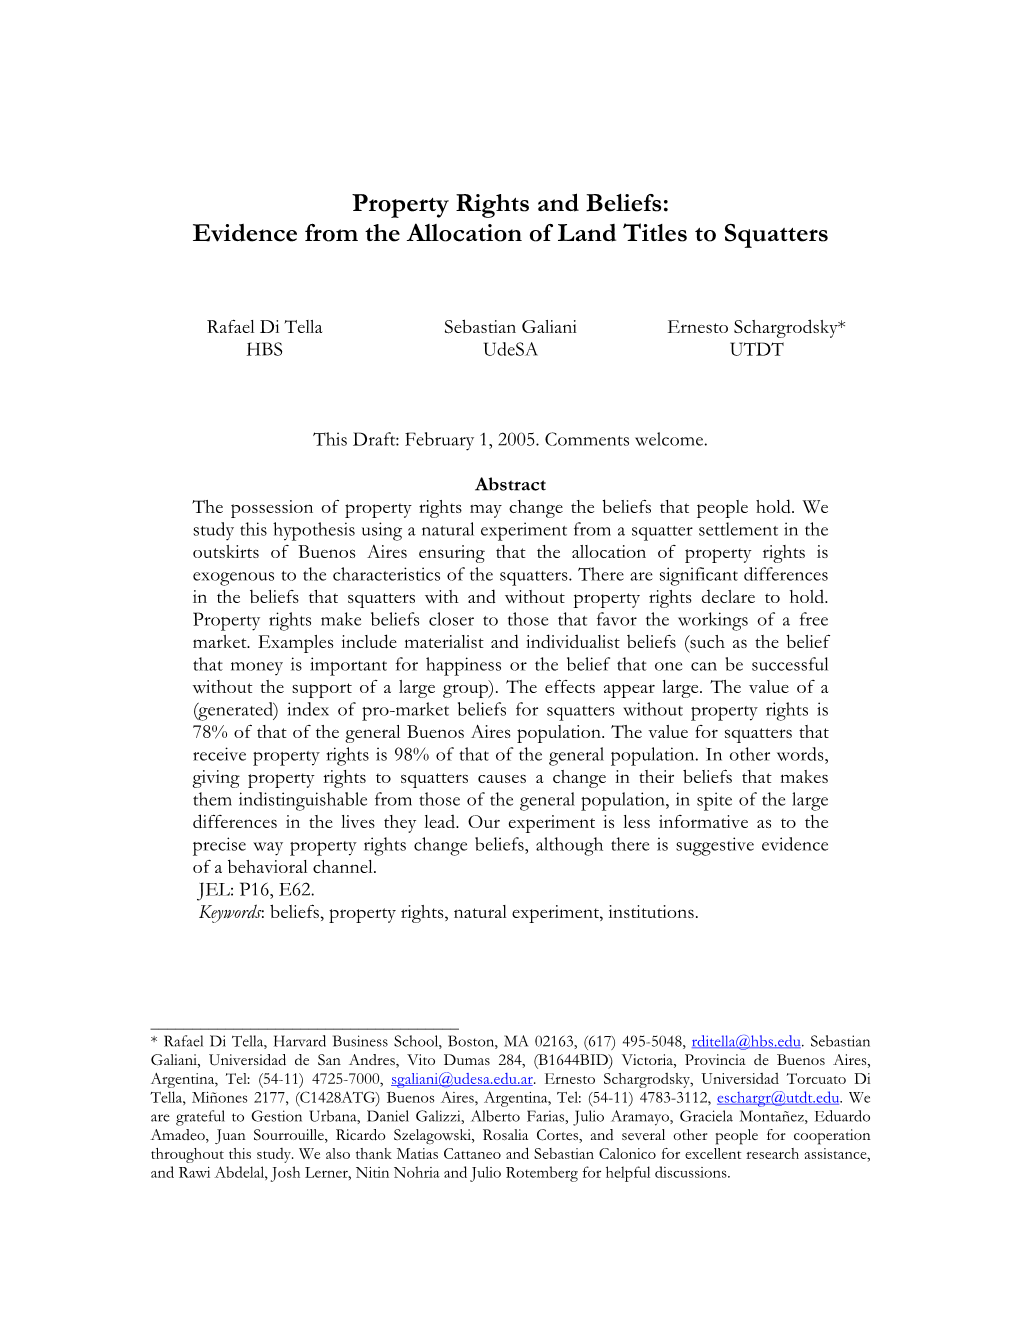 Property Rights and Beliefs: Evidence from the Allocation of Land Titles to Squatters